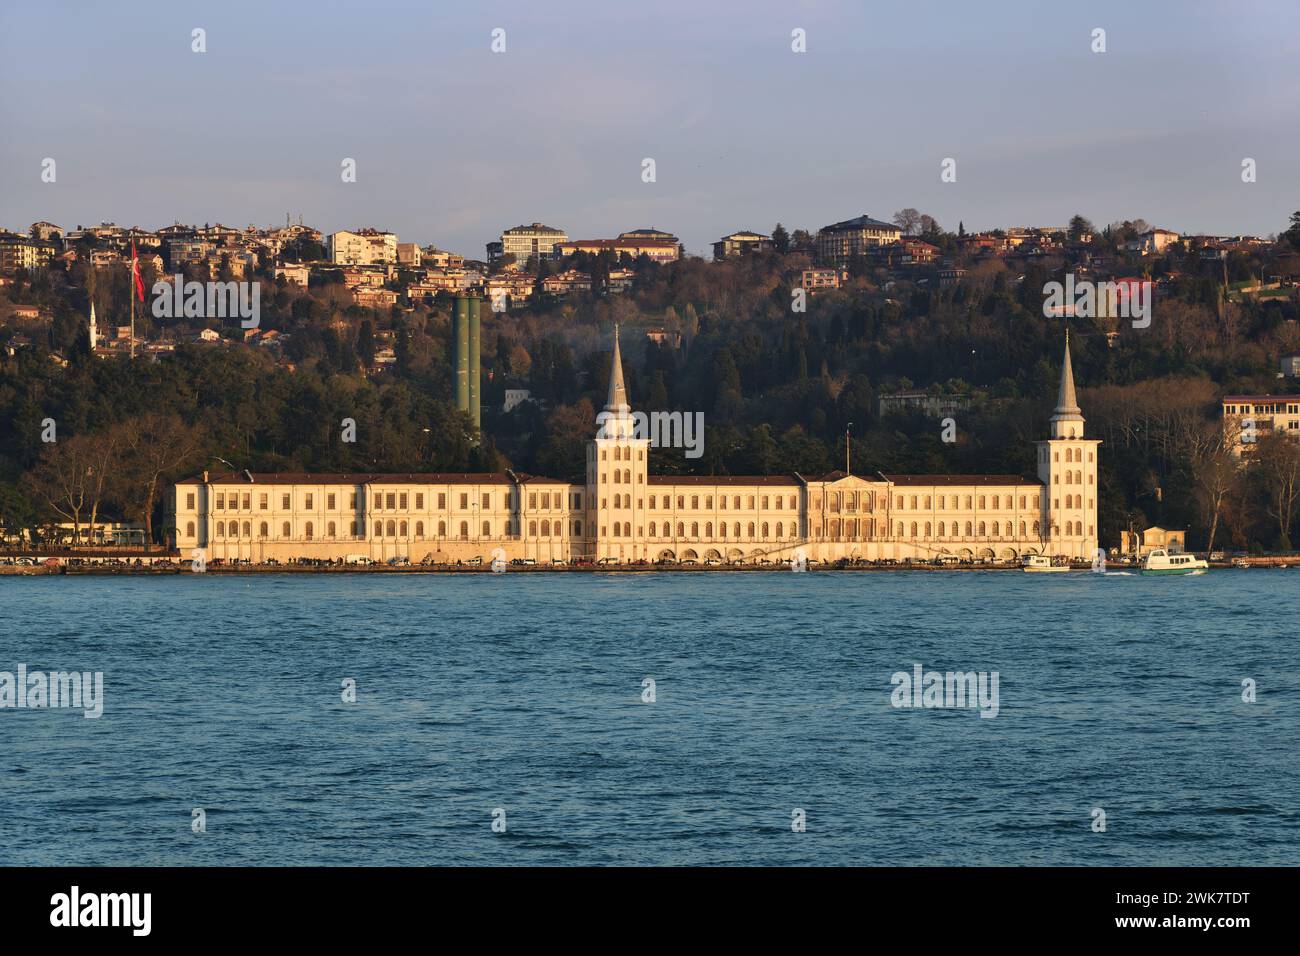 The former Kuleli Military High School was the oldest military high school in Turkey, located in Cengelkoy, Istanbul, on the Asian side of the Bosphor Stock Photo